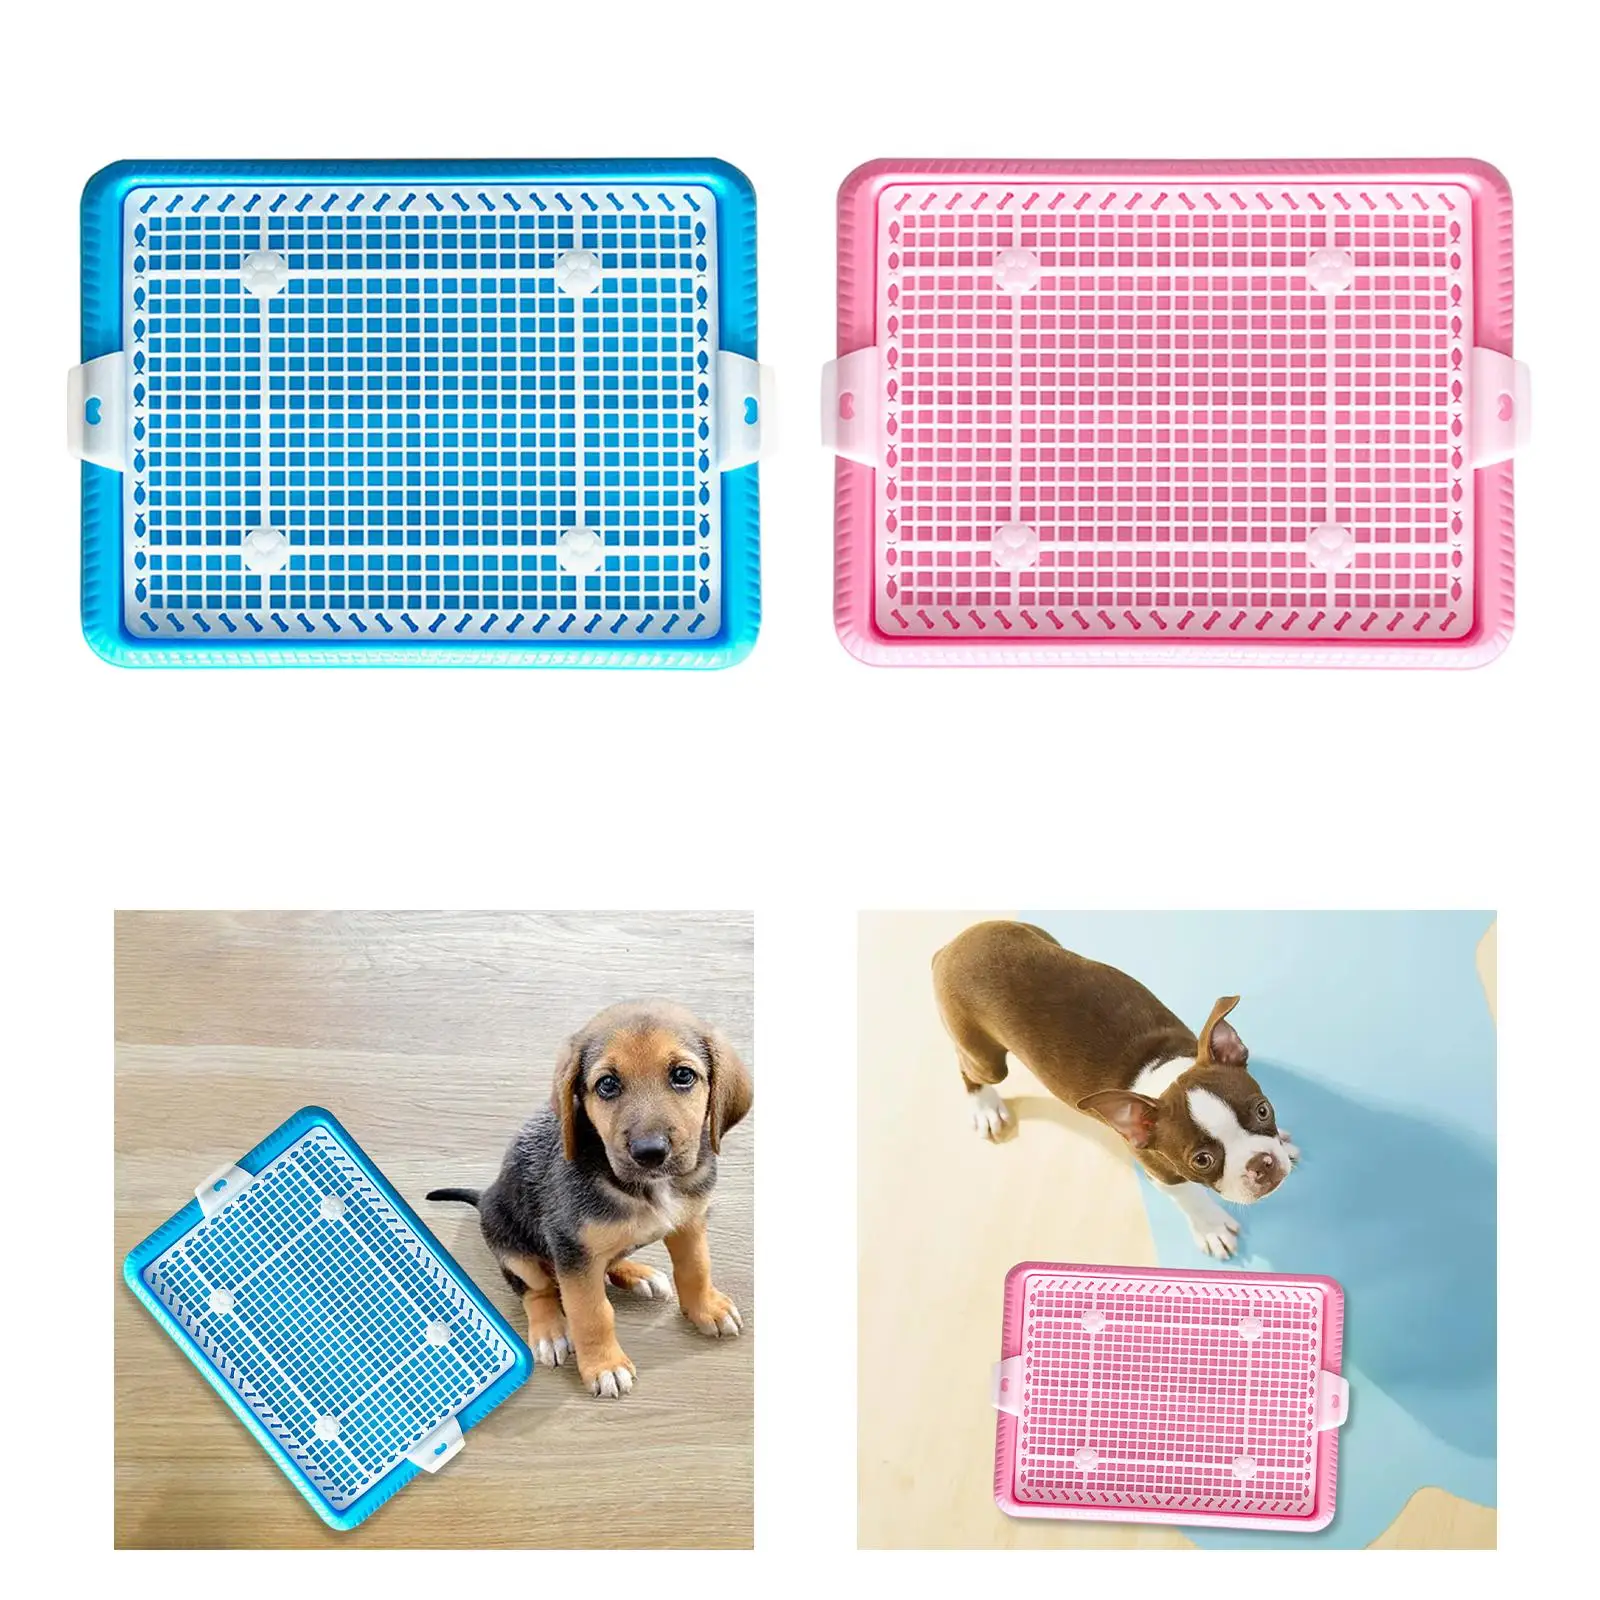 Dog Litter Boxes Indoor Easy to Clean Anti Slip Mesh Training Potty Pan Potty Trainer Corner for Small Size Dogs